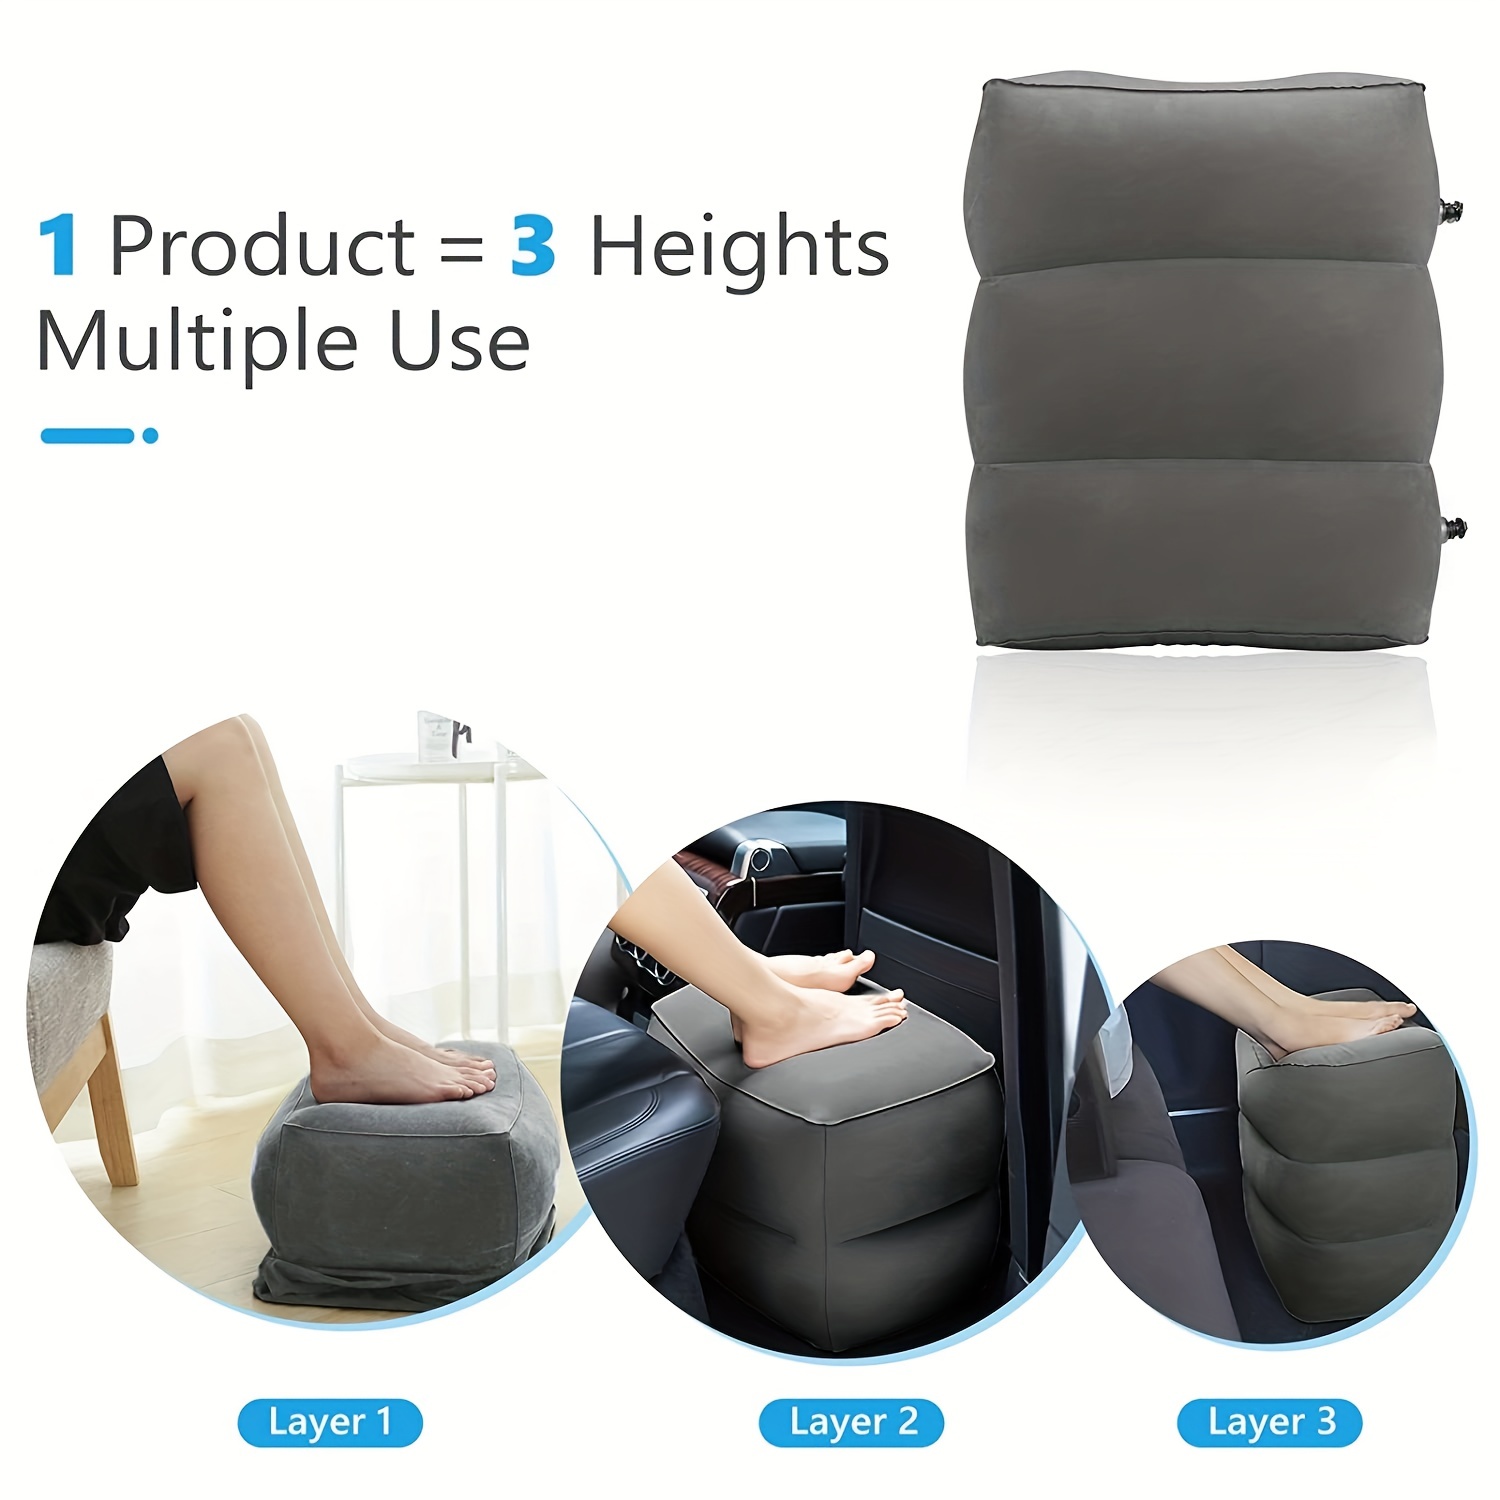 2 Foldable Inflatable Seat Cushions For Travel, Car, Bus, Train